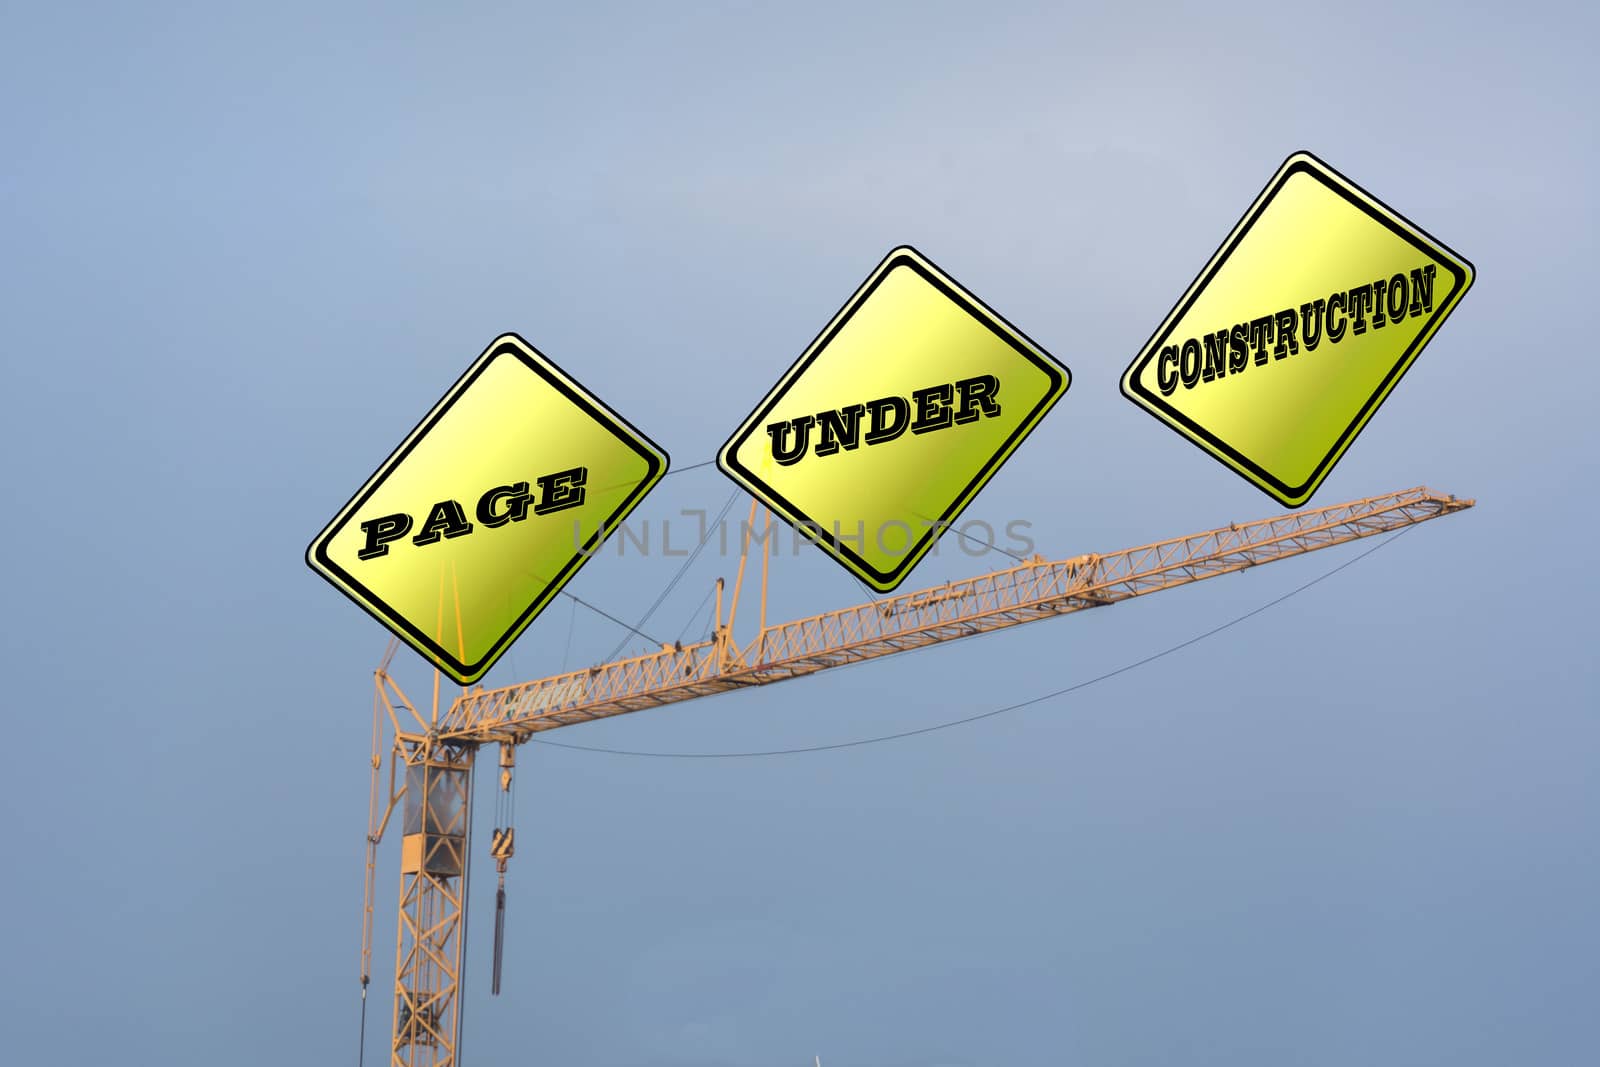 Large yellow signs on a construction crane that says "Page Under Construction"
